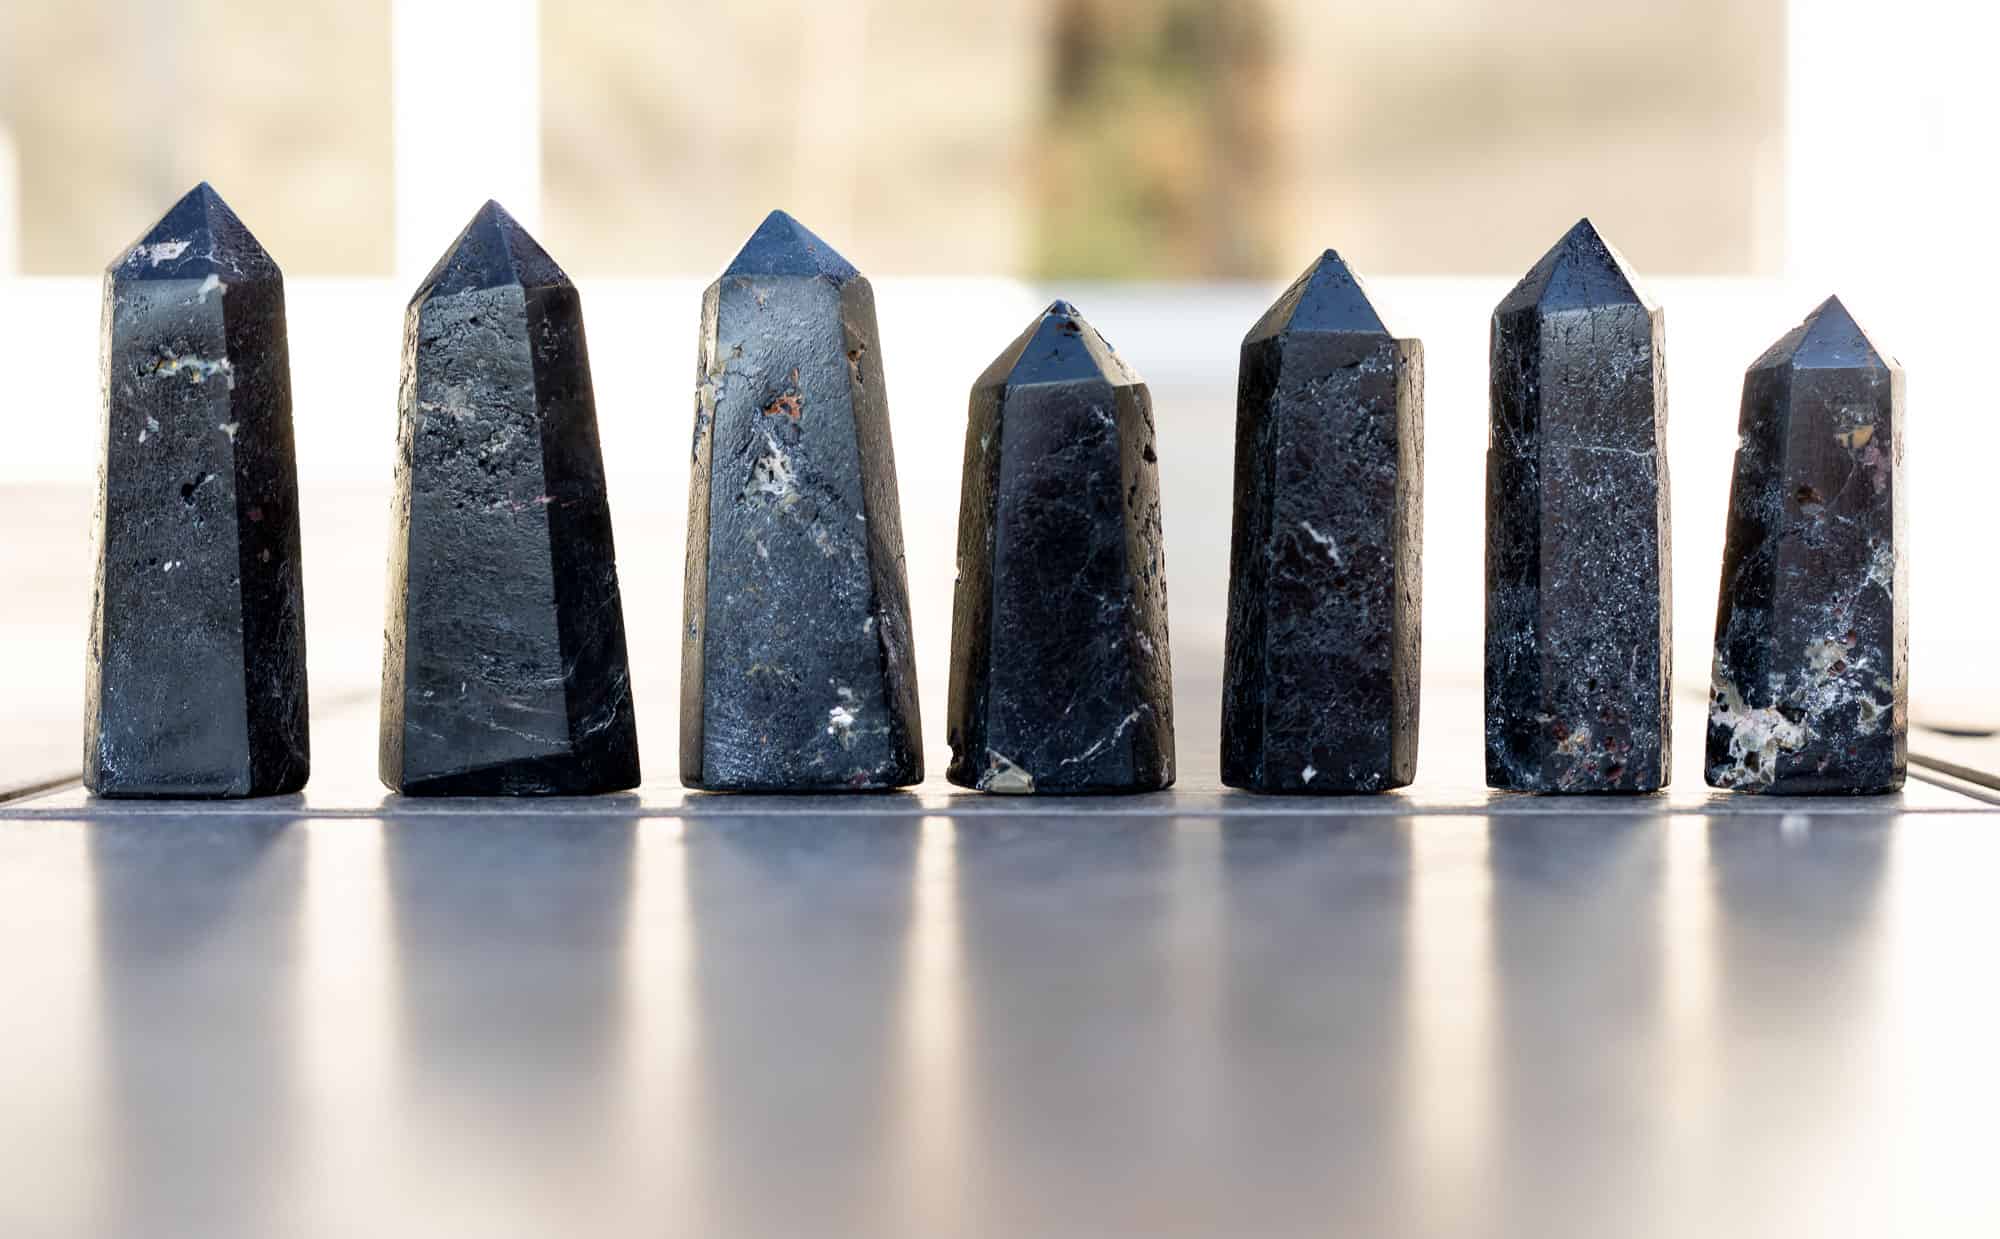 Black Tourmaline towers on a table.